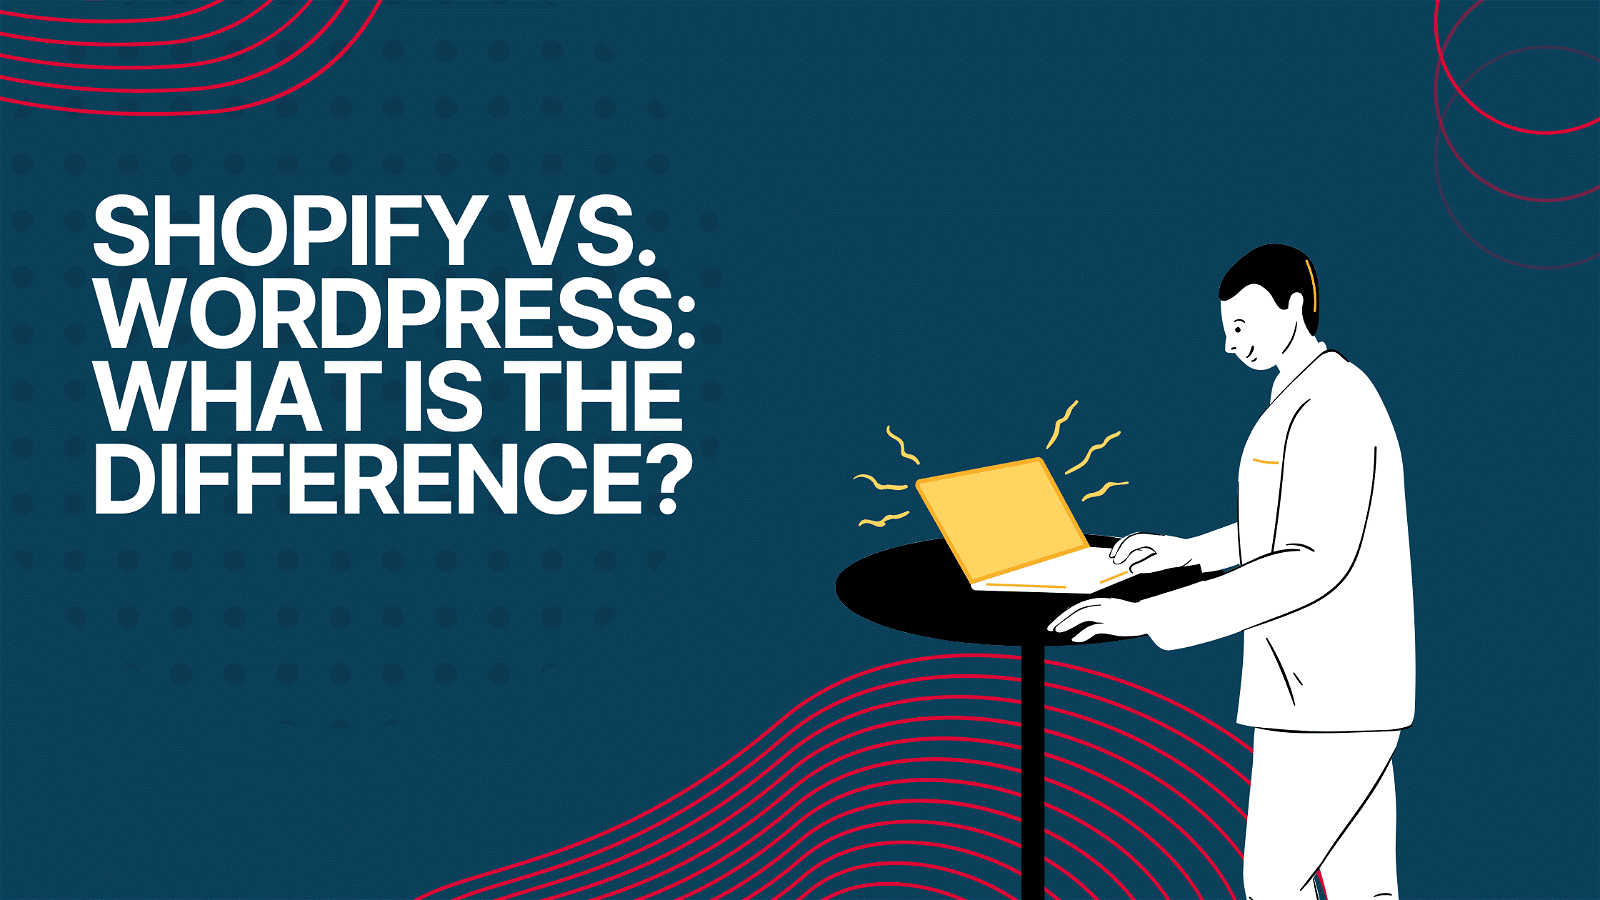 This image is showing a comparison between Shopify and WordPress, highlighting the differences between the two platforms.